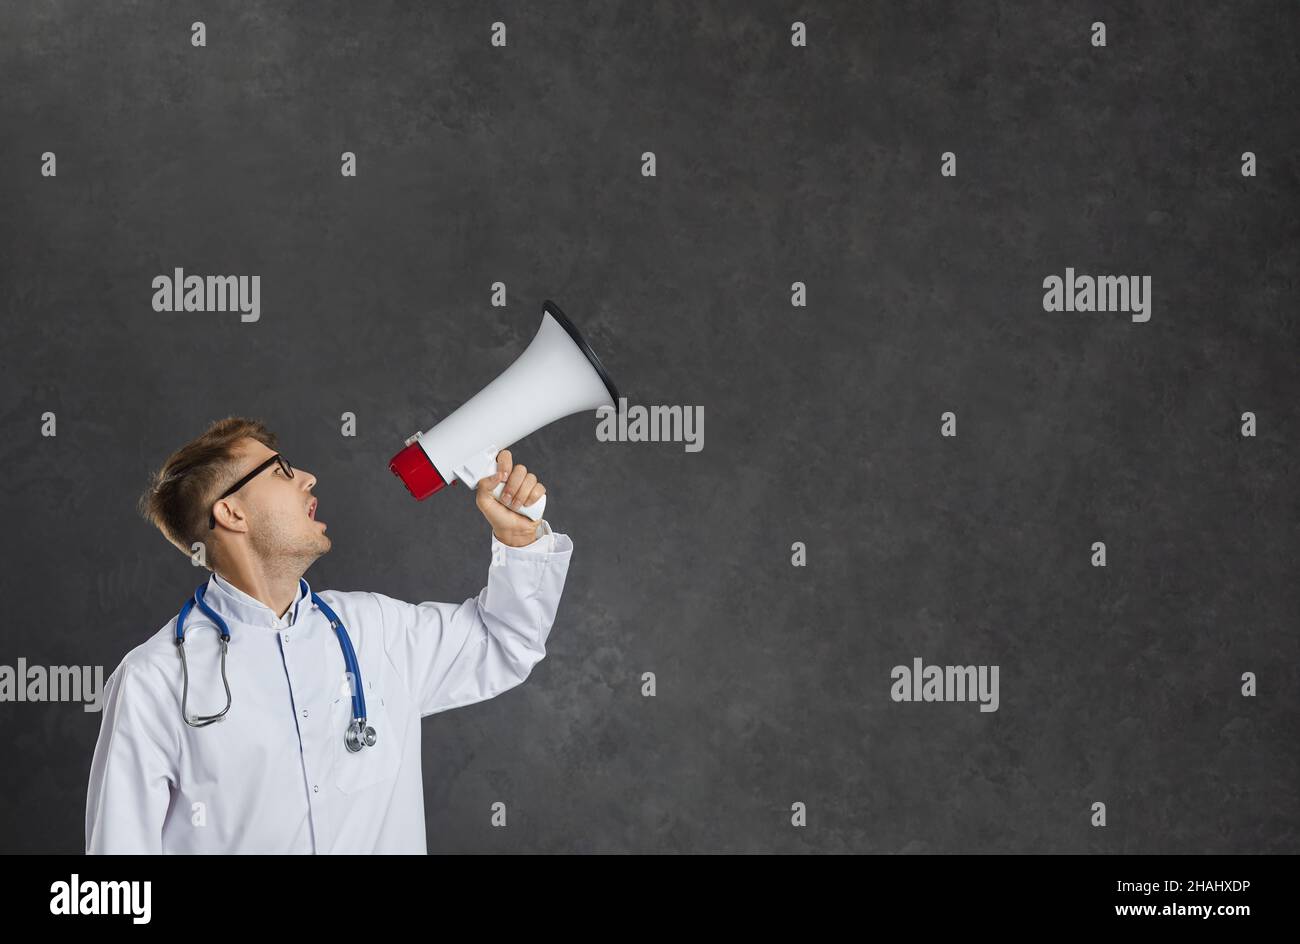 Male healthcare worker loudly making announcement using megaphone while standing on gray background. Stock Photo